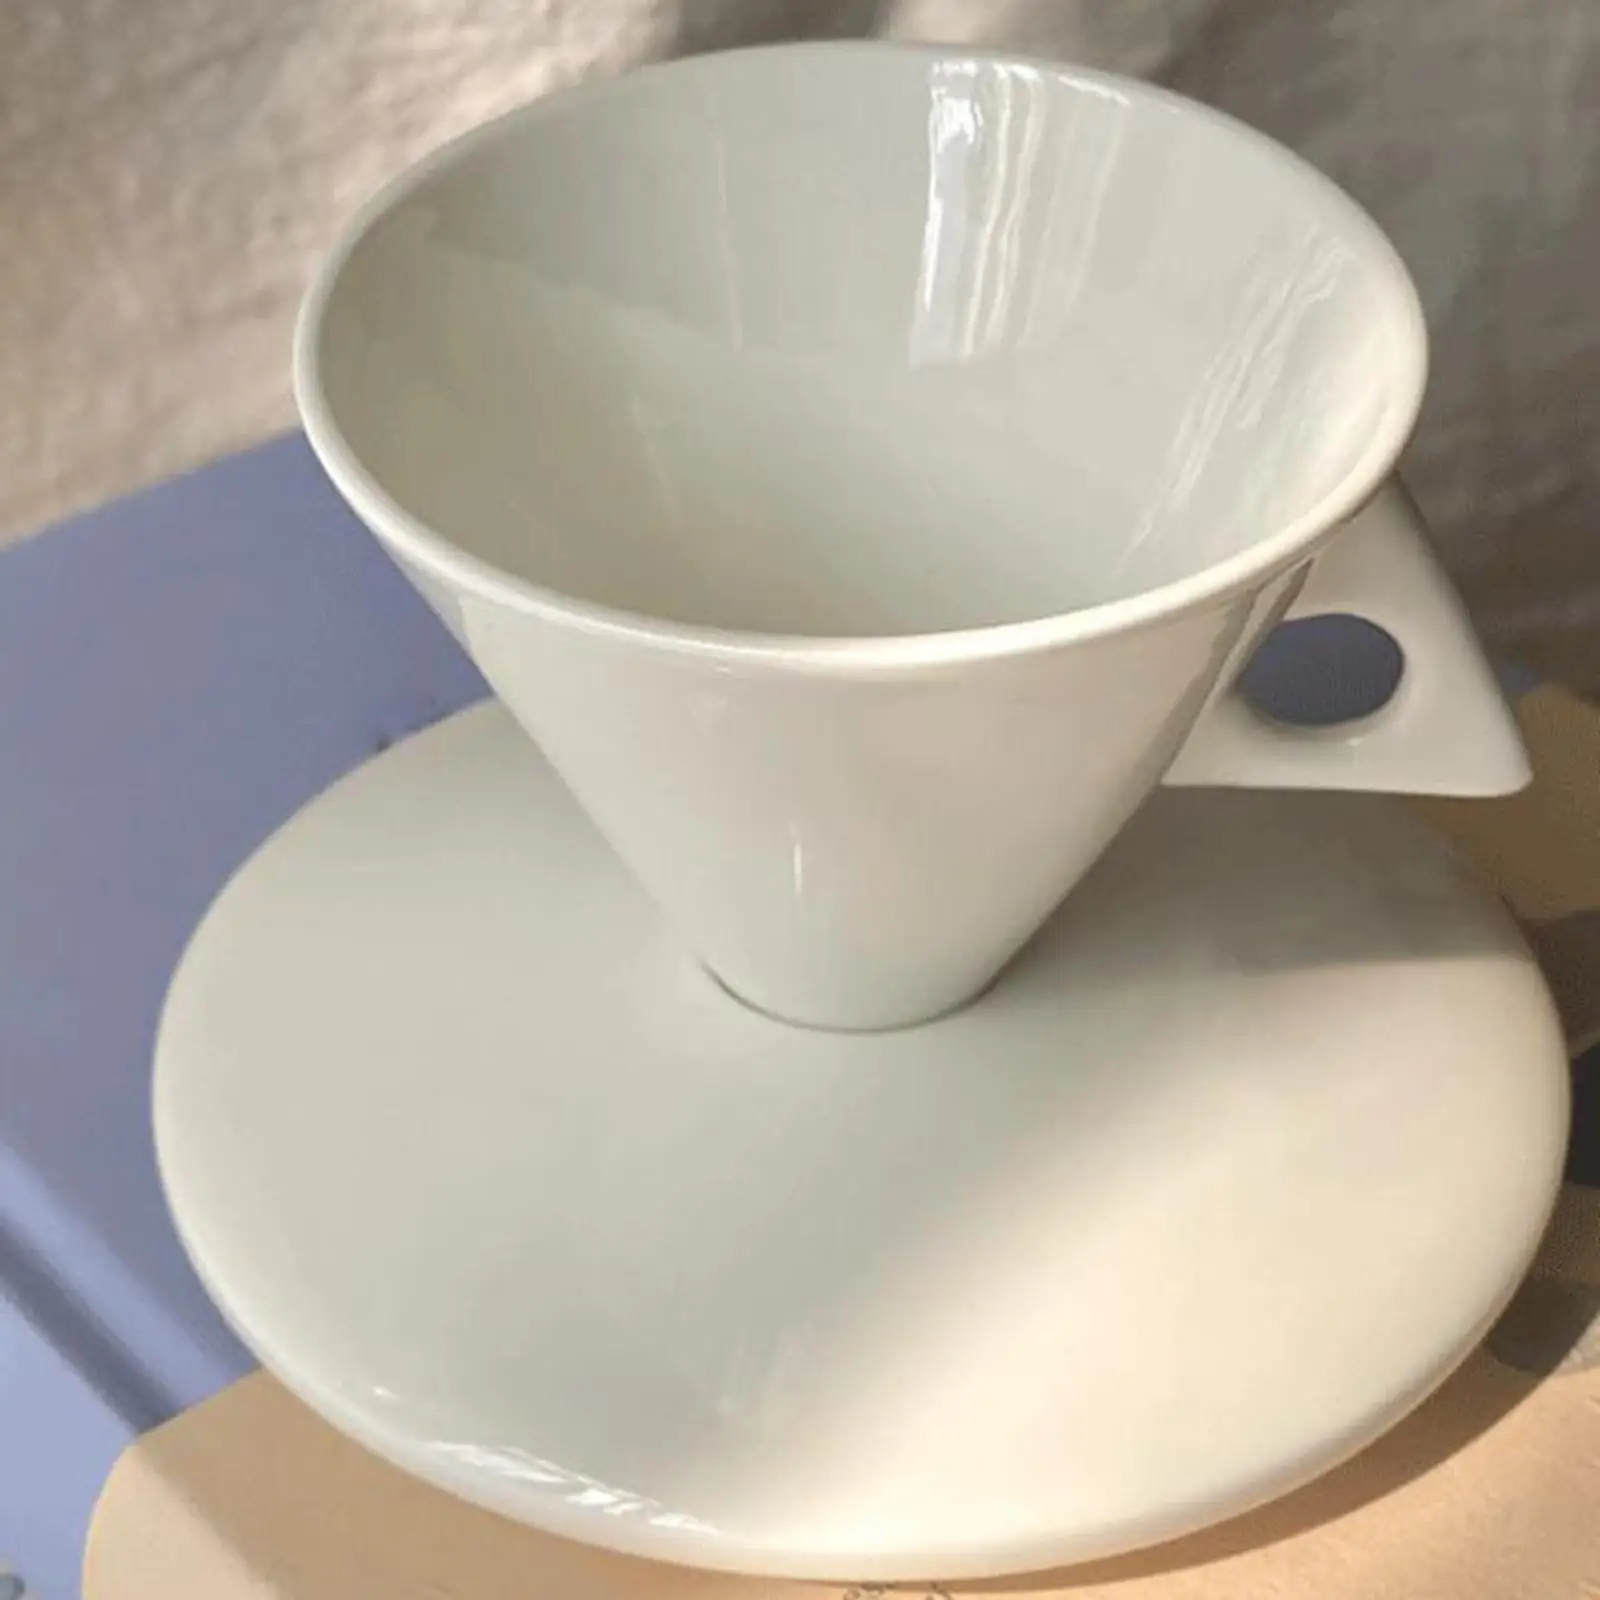 Cone Type Coffee Cup and Saucer Set Teacup for Home Office 